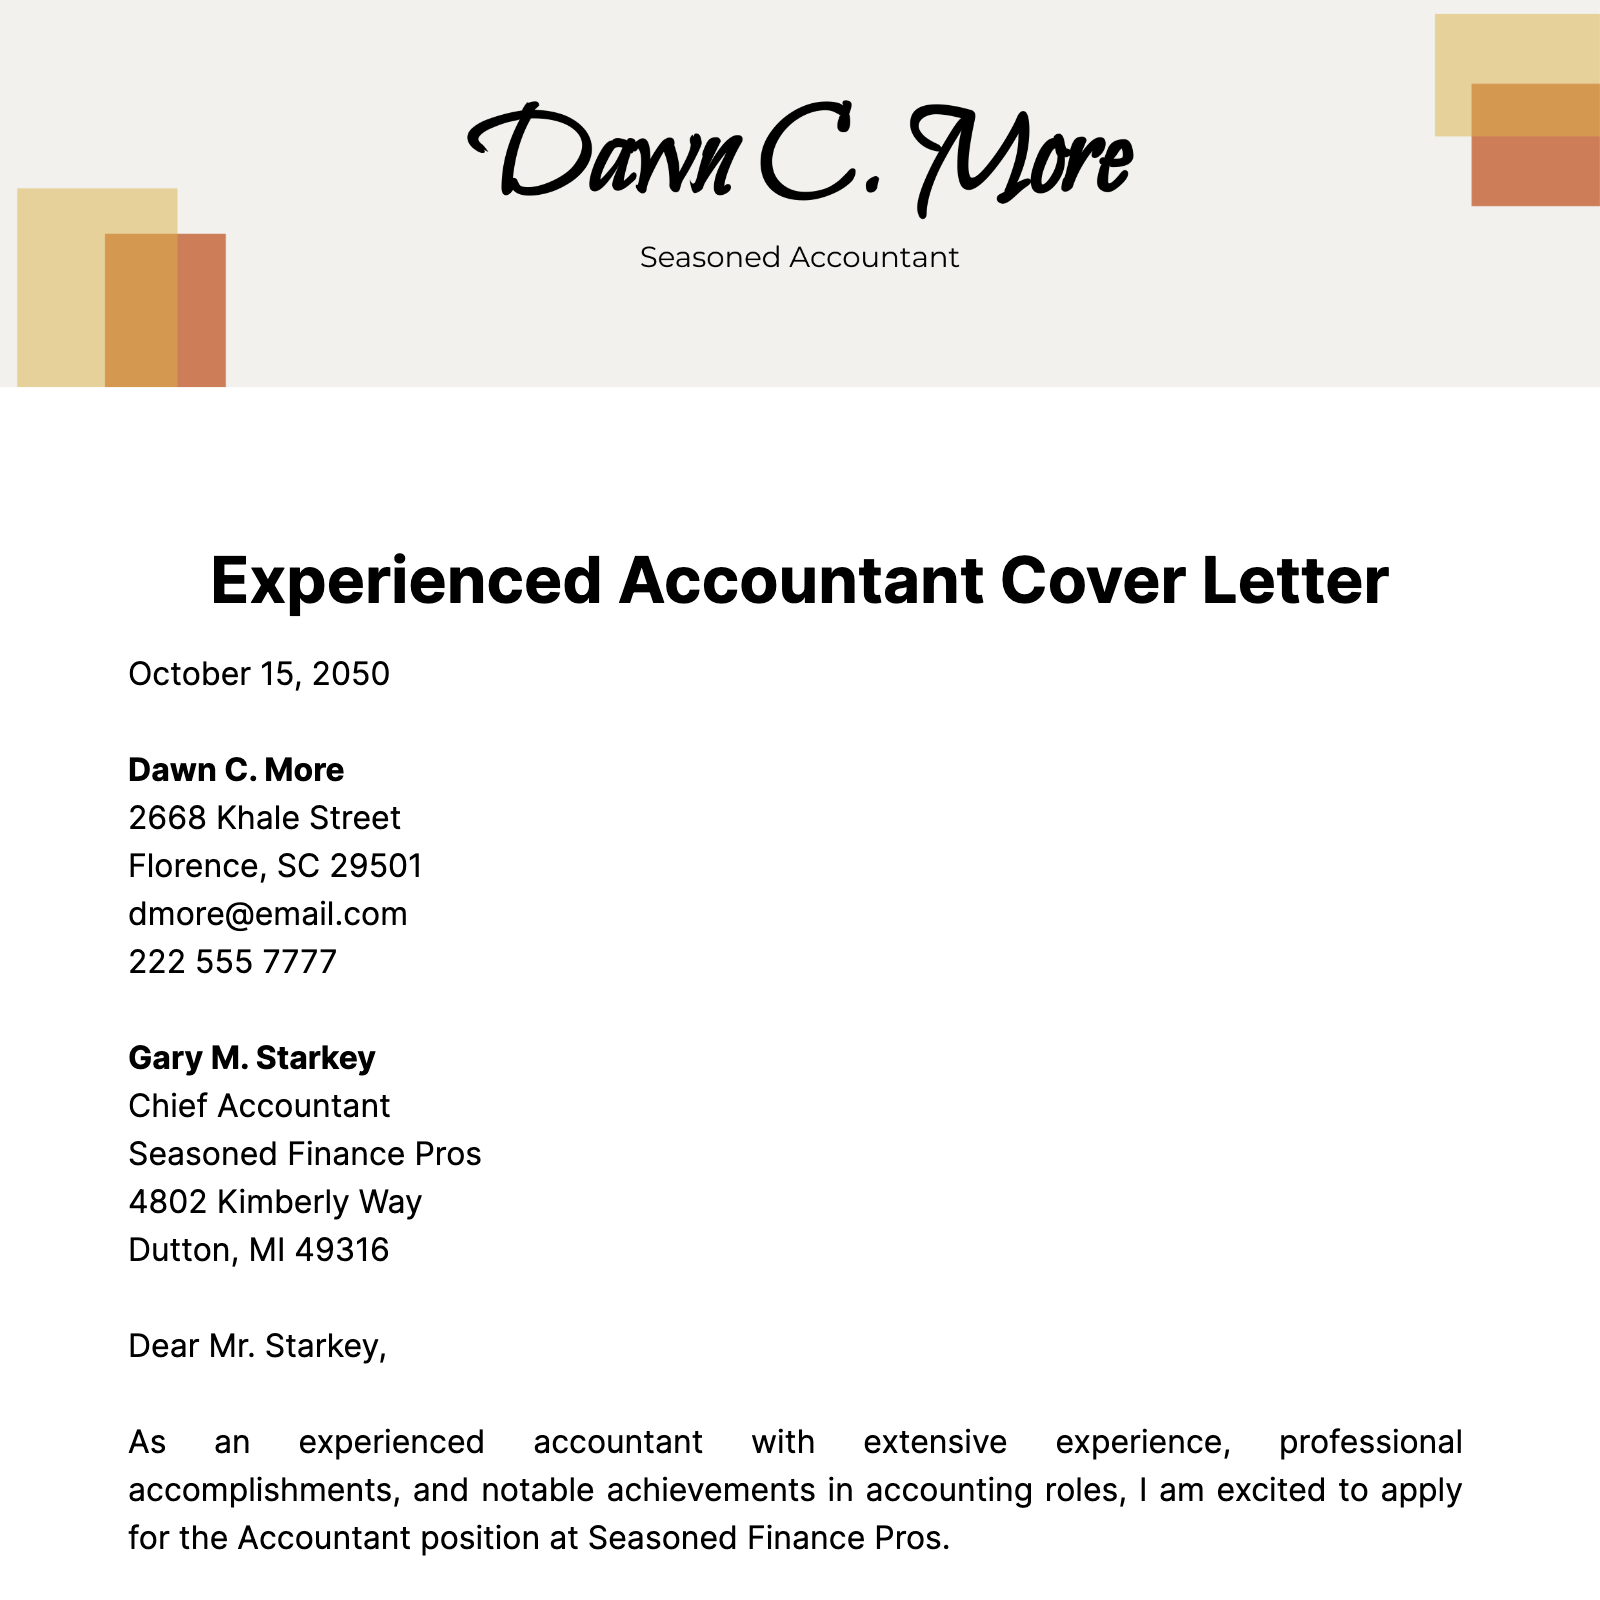 Experienced Accountant Cover Letter Template